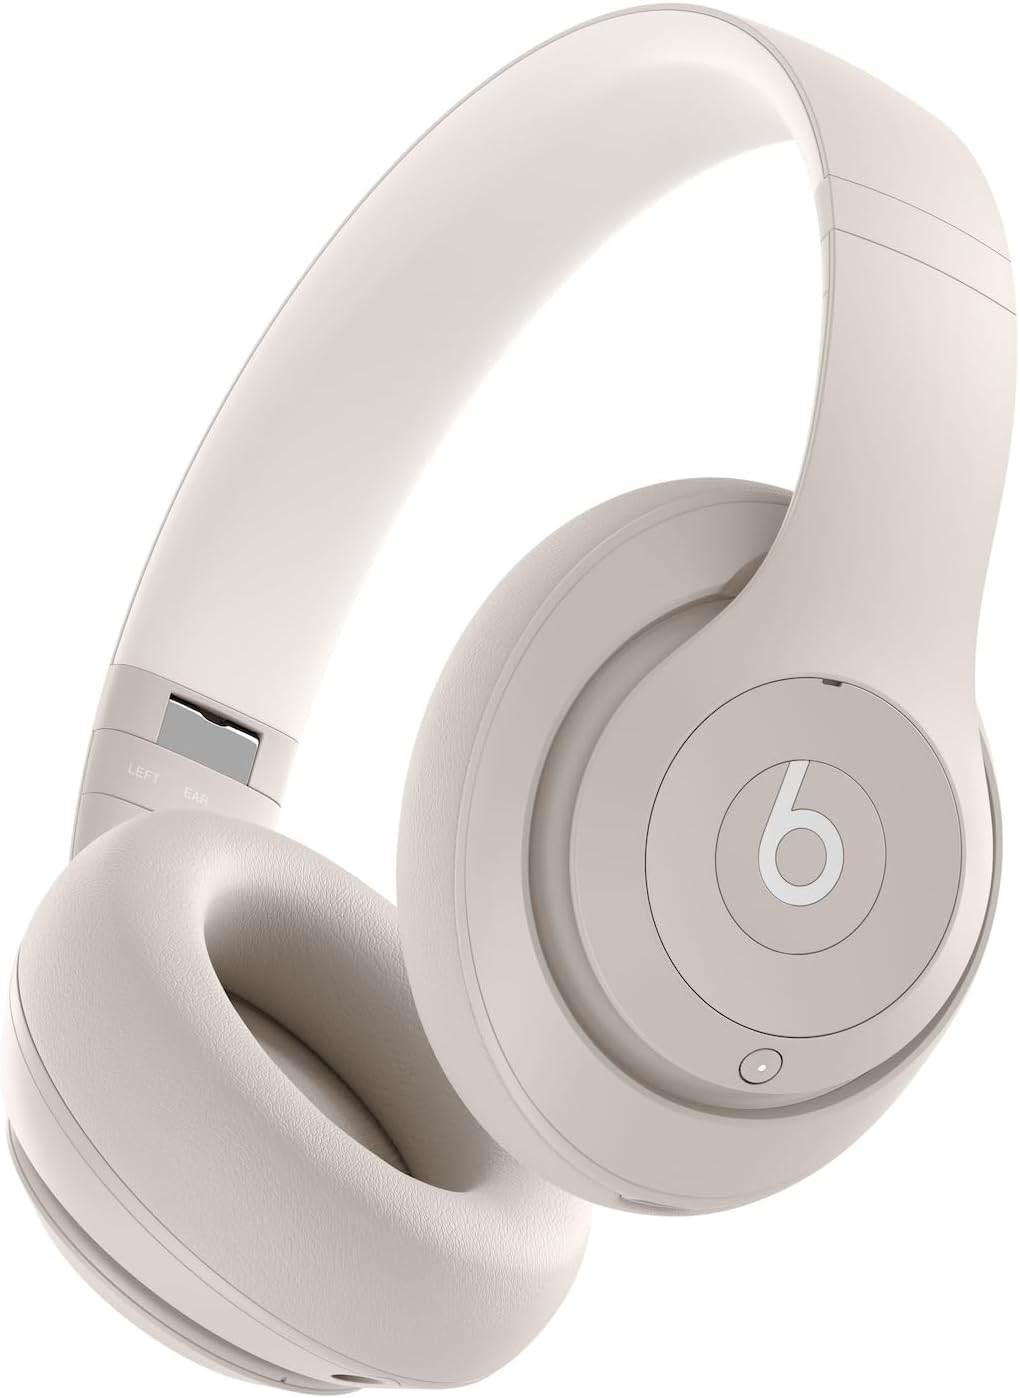 Beats Studio Pro - Wireless Bluetooth Noise Cancelling Headphones - Personalized Spatial Audio, USB-C Lossless Audio, Apple & Android Compatibility, Up to 40 Hours Battery Life - Sandstone